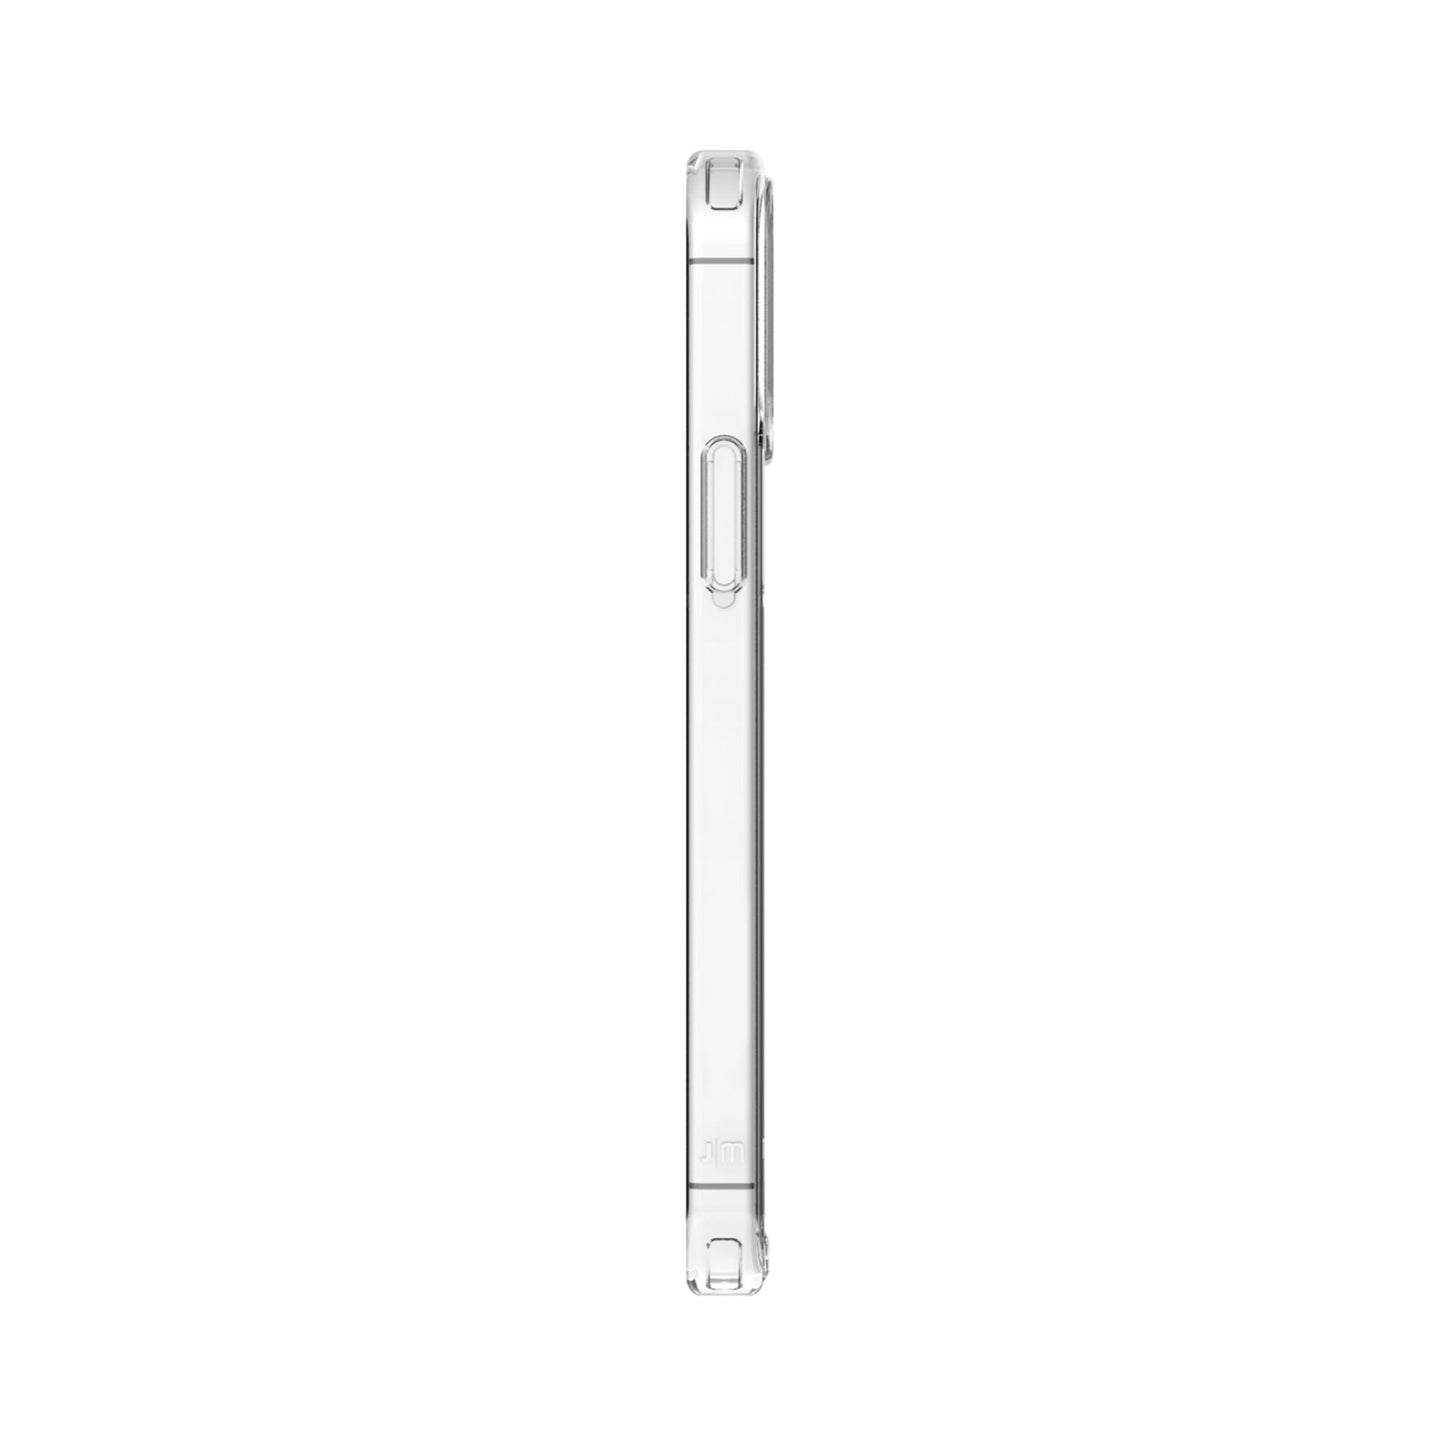 JUST MOBILE Tenc Air for iPhone 12 Mini - Crystal Clear